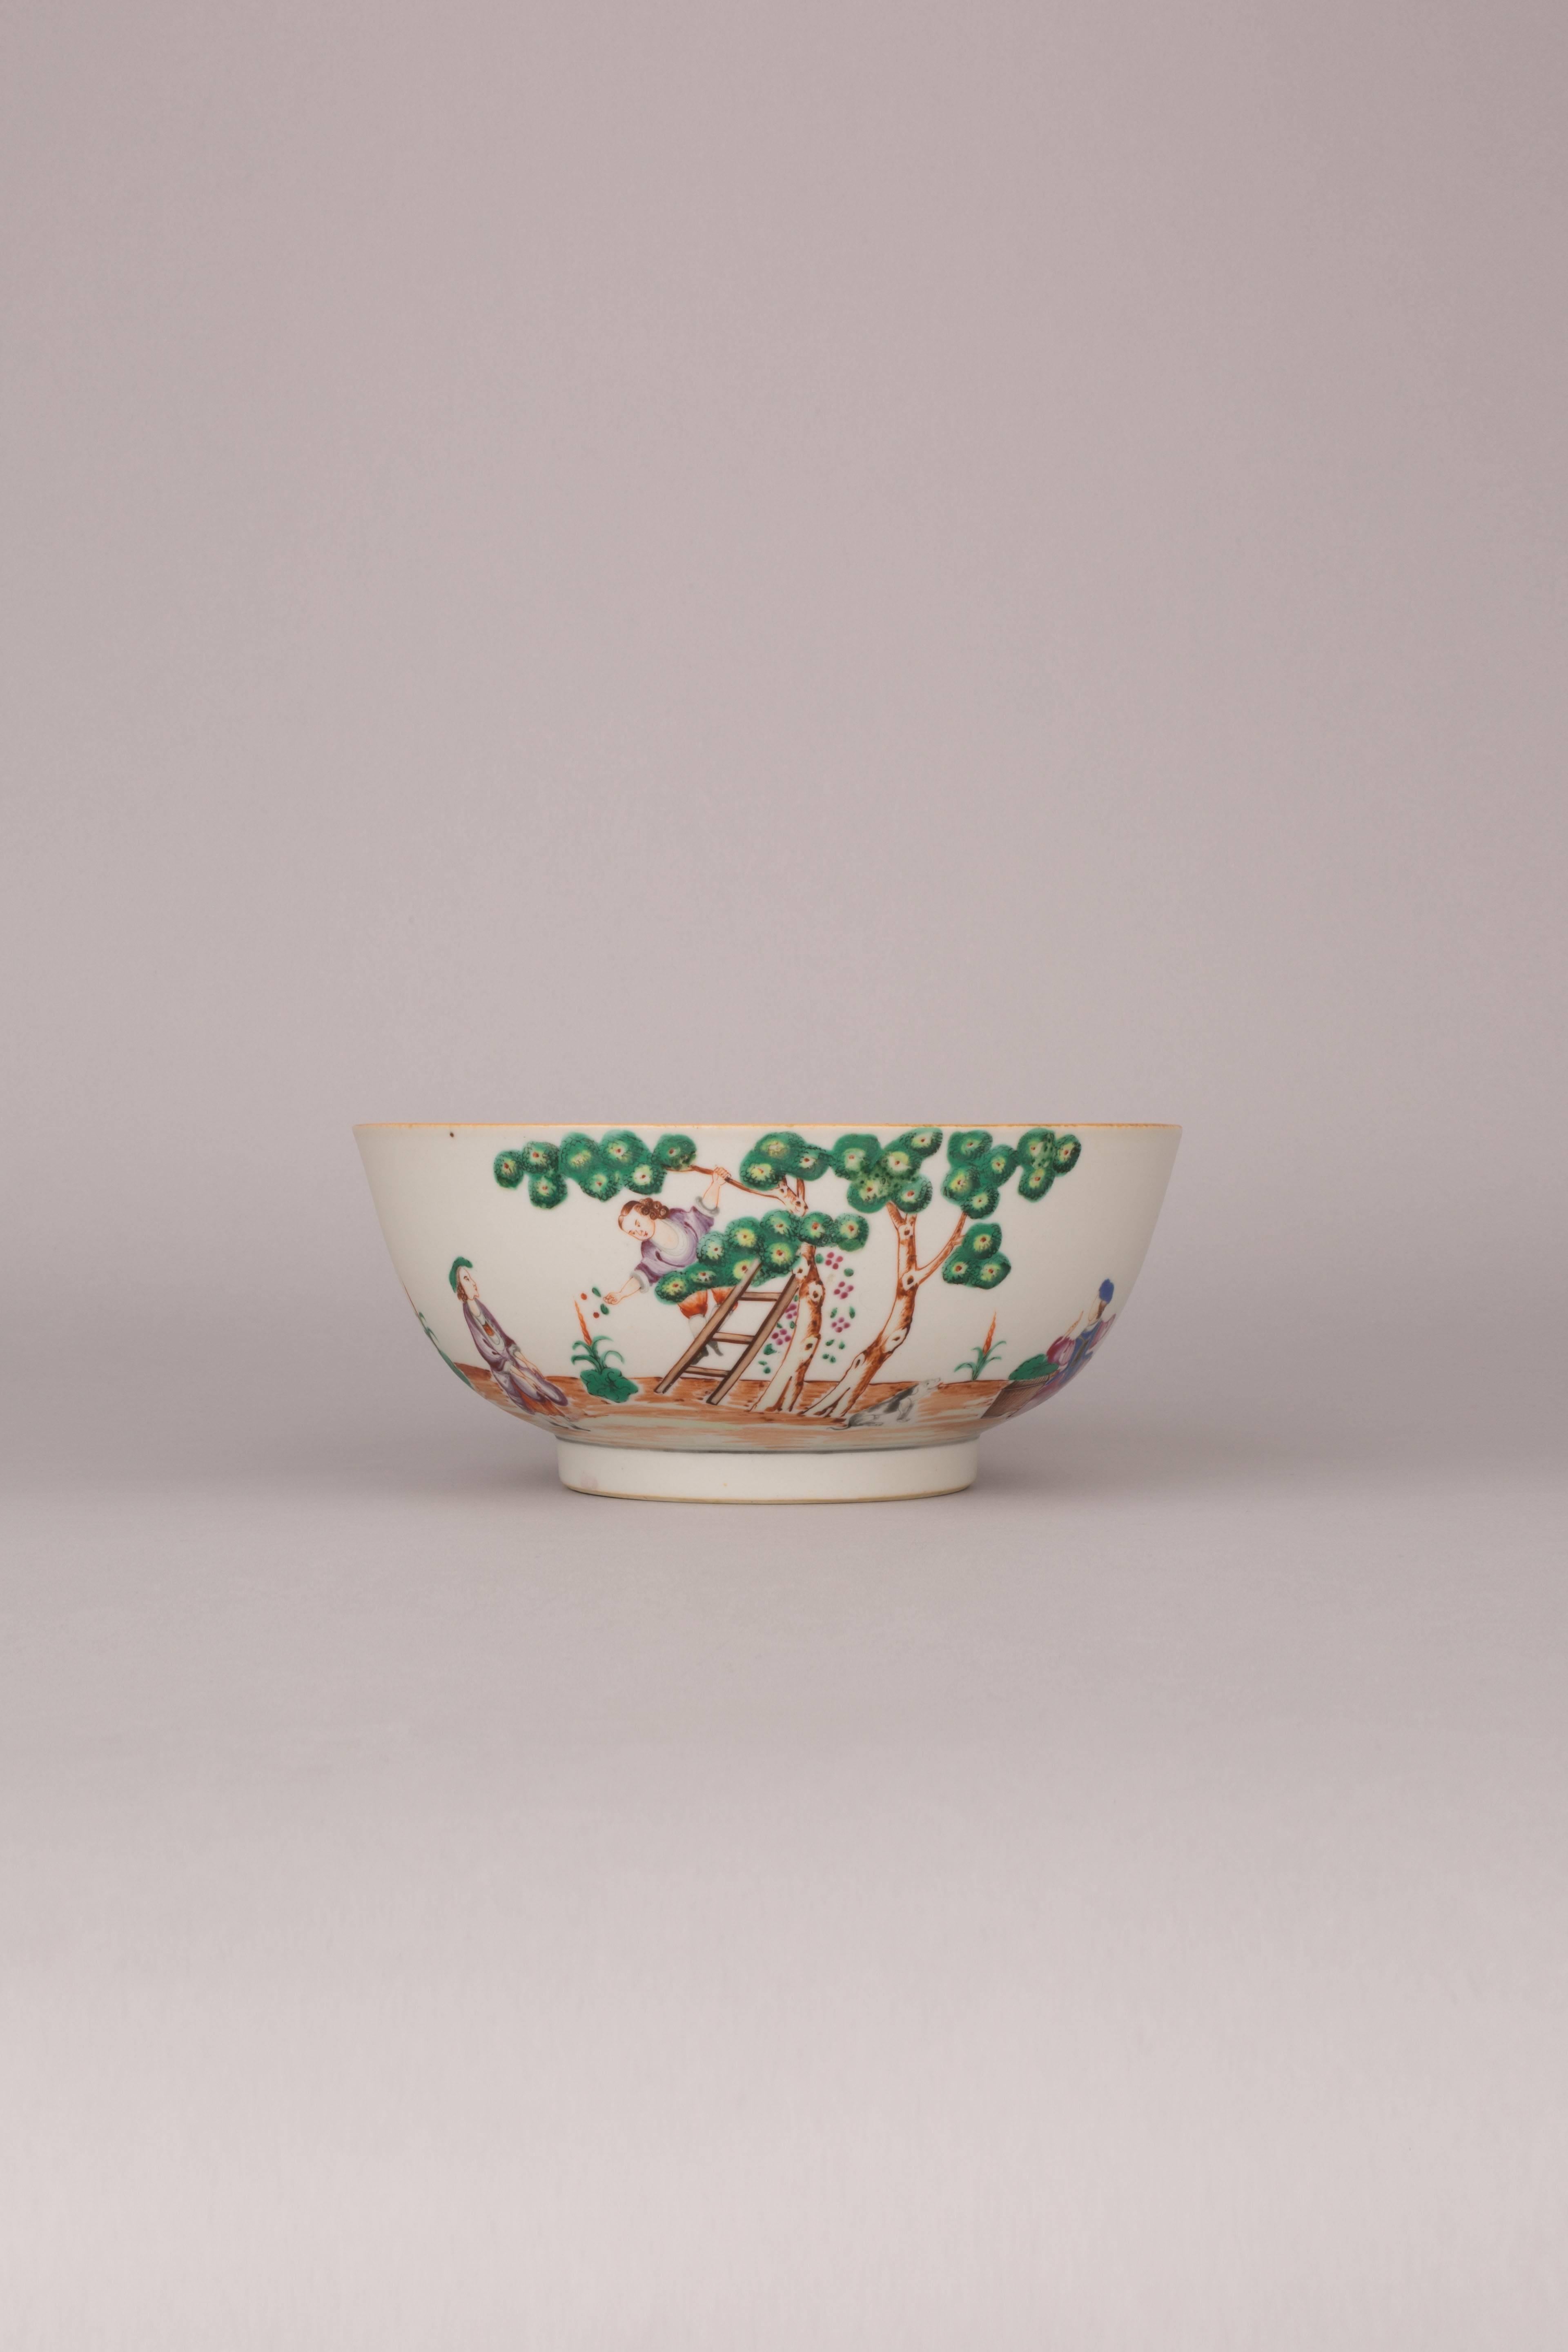 A Chinese export porcelain famille rose deep bowl, painted in a continuous scene with the ‘Cherry Pickers’, with a lady dressed as a boy climbing a ladder passing the cherries to a young man dressed as a woman collecting them in the front of his